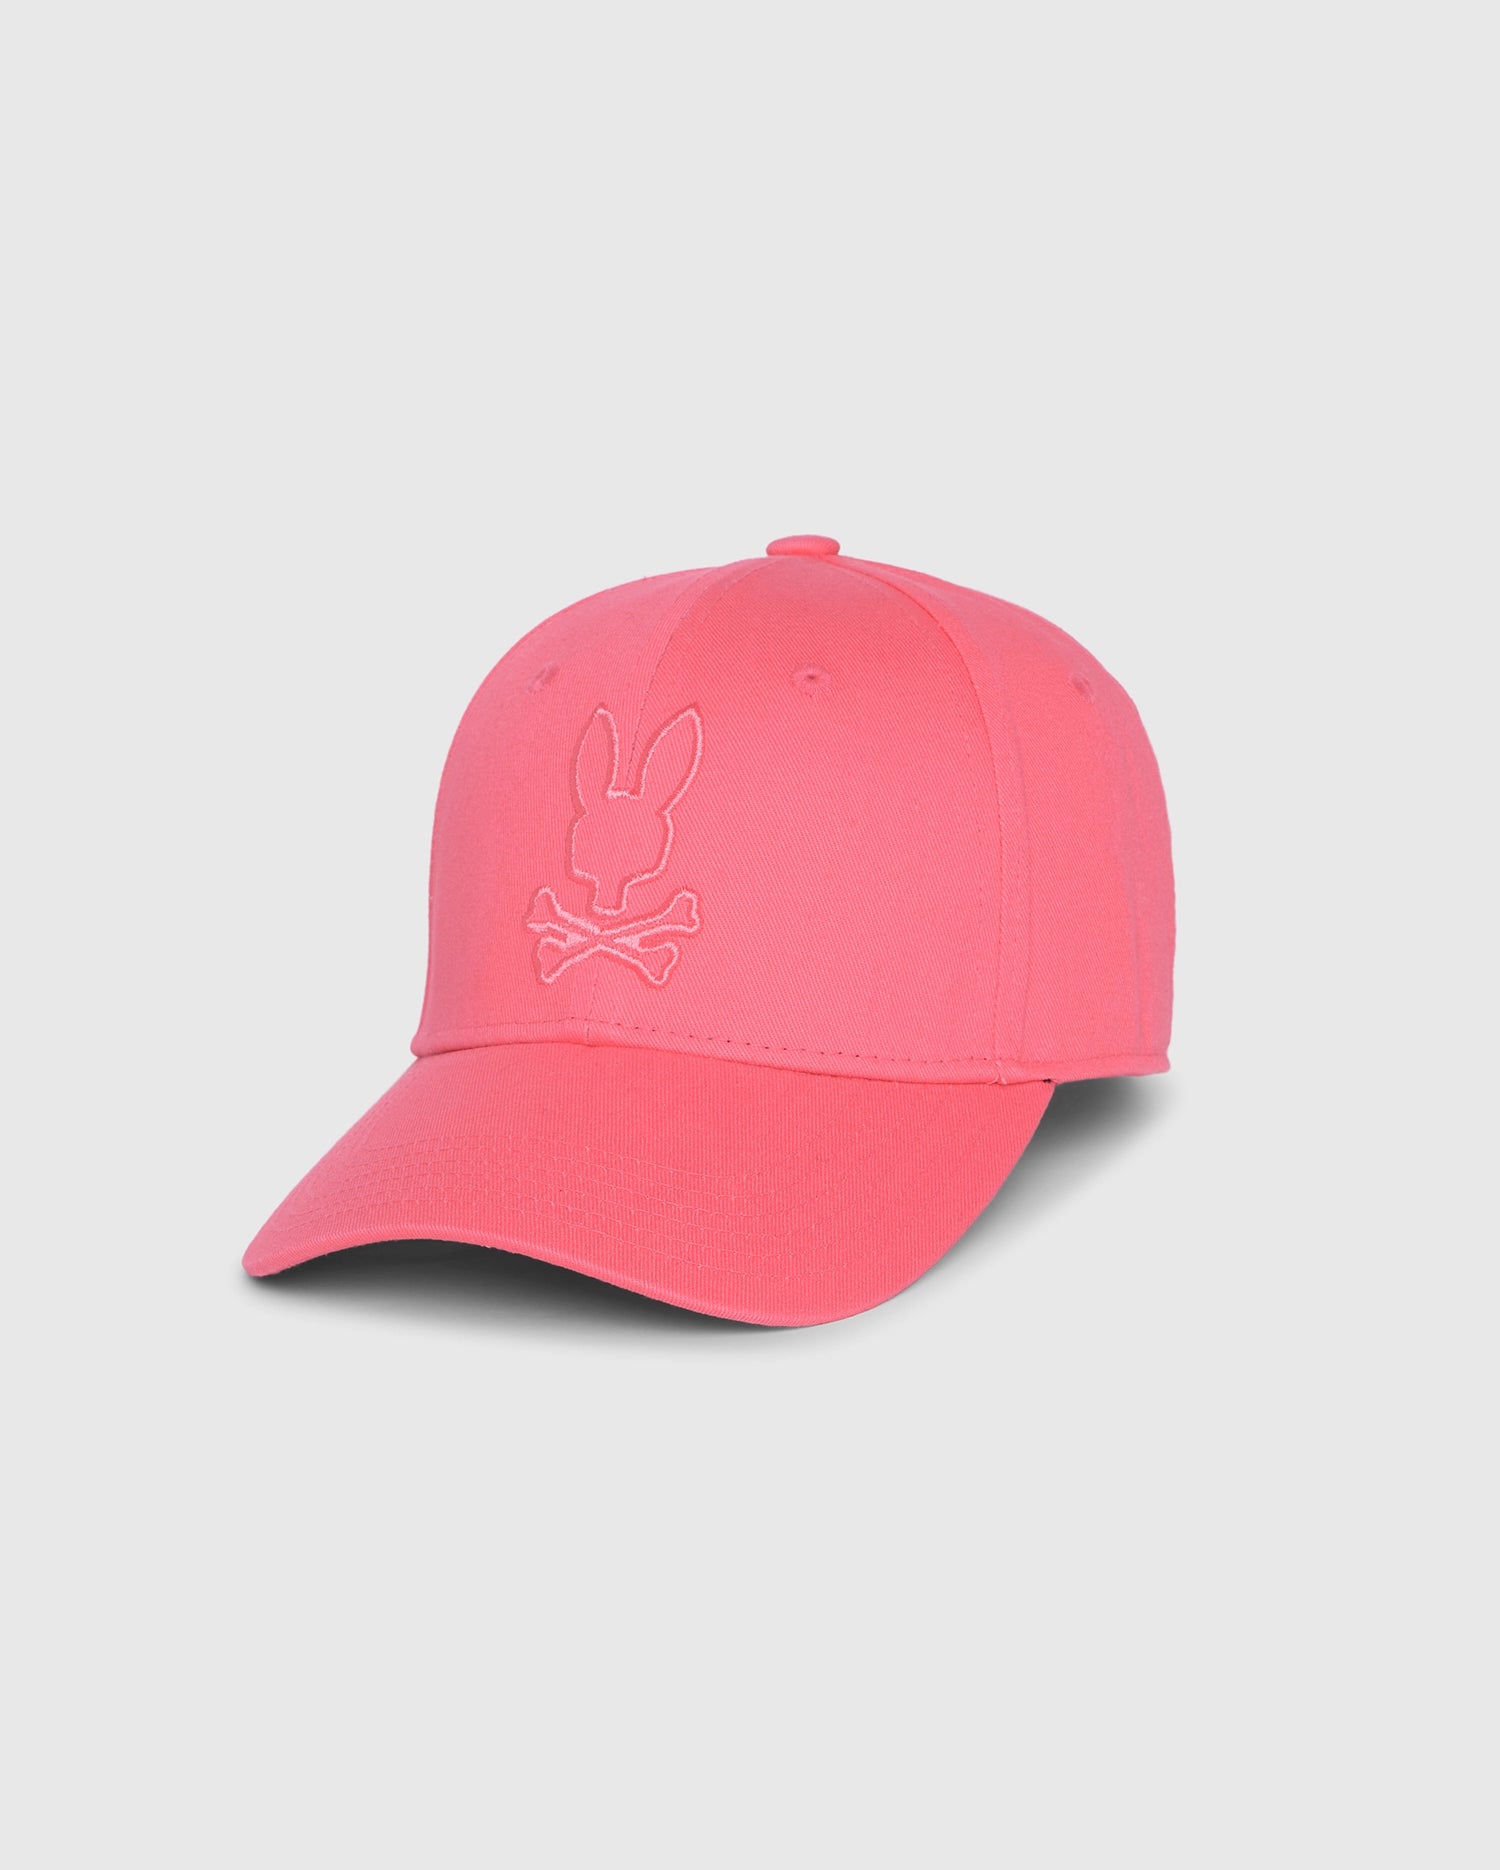 A bright pink MENS DANBY BASEBALL CAP - B6A360B2HT from Psycho Bunny with an embroidered bunny head above two crossed bones on the front panel. The cap features a curved brim, six ventilation holes on the crown, and an adjustable clasp for a perfect fit.